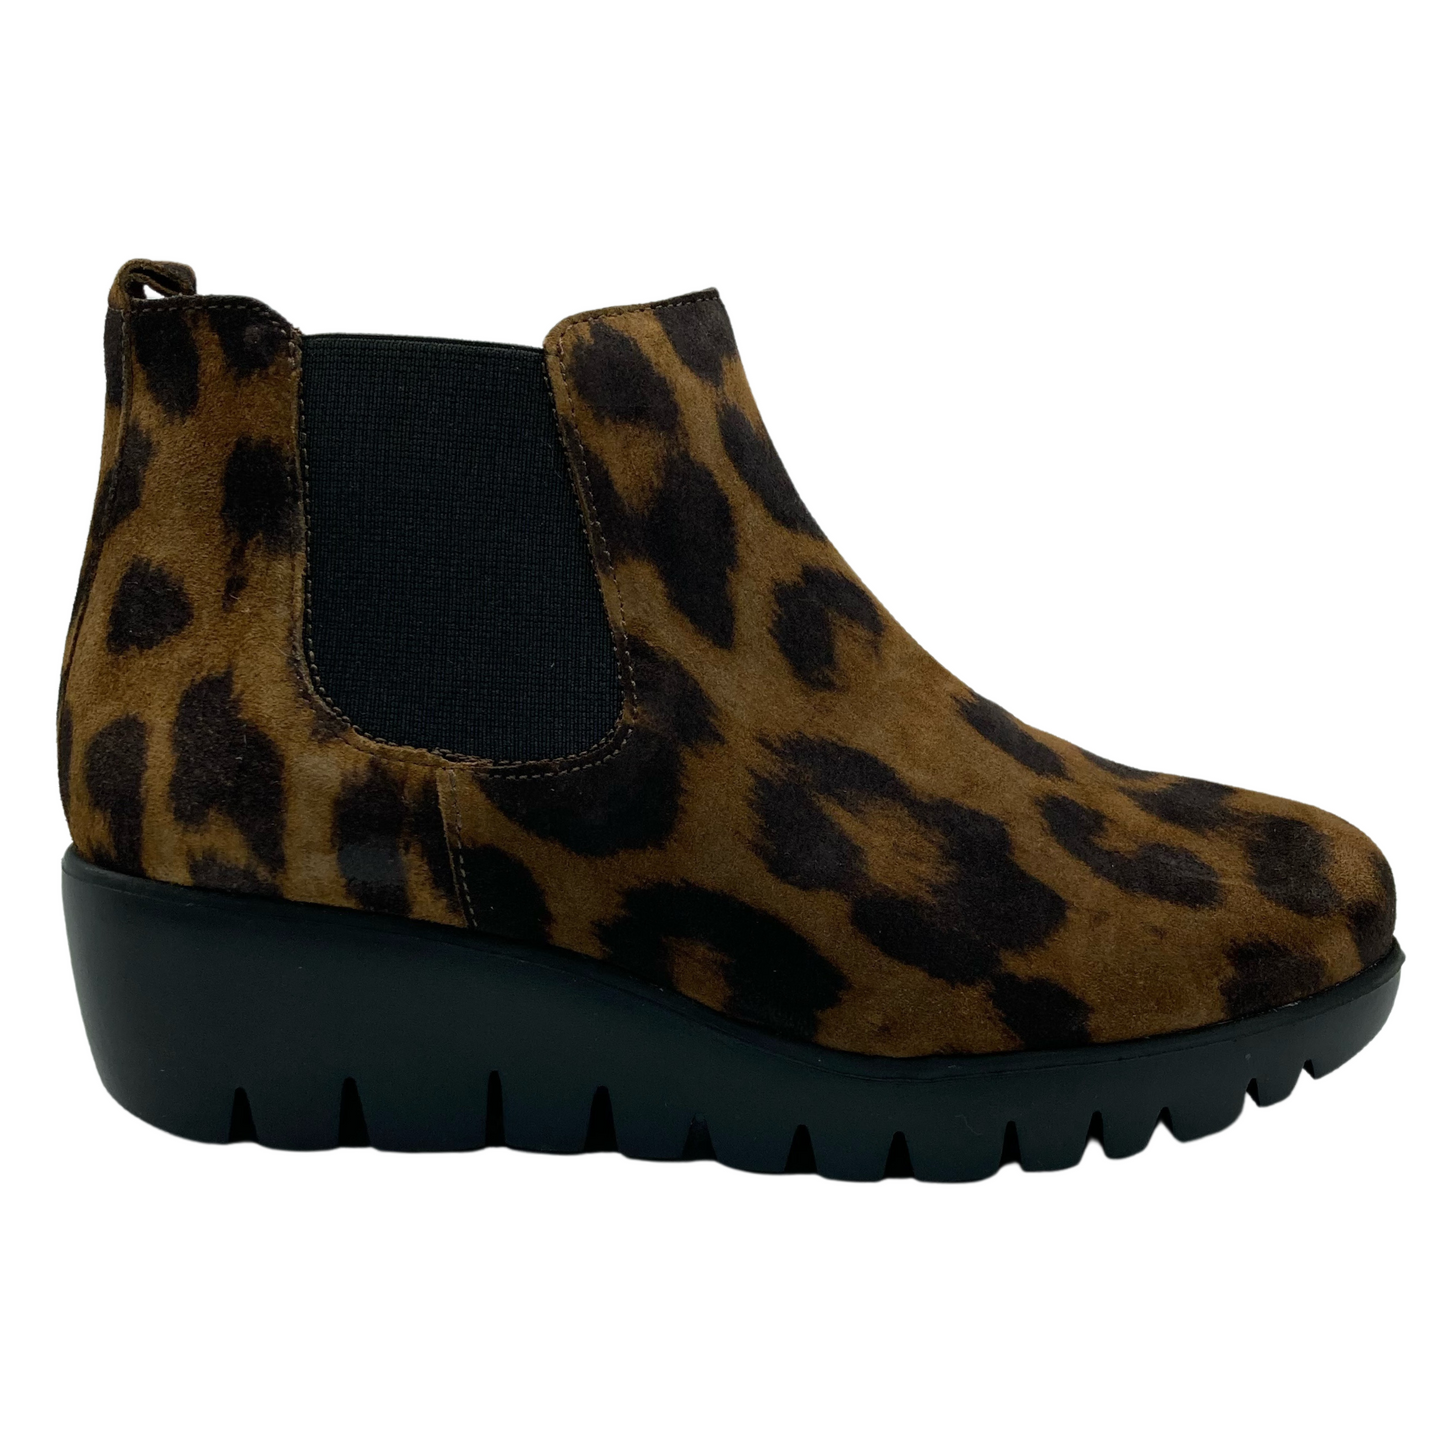 Right facing view of leopard print suede boot with black rubber wedge heel